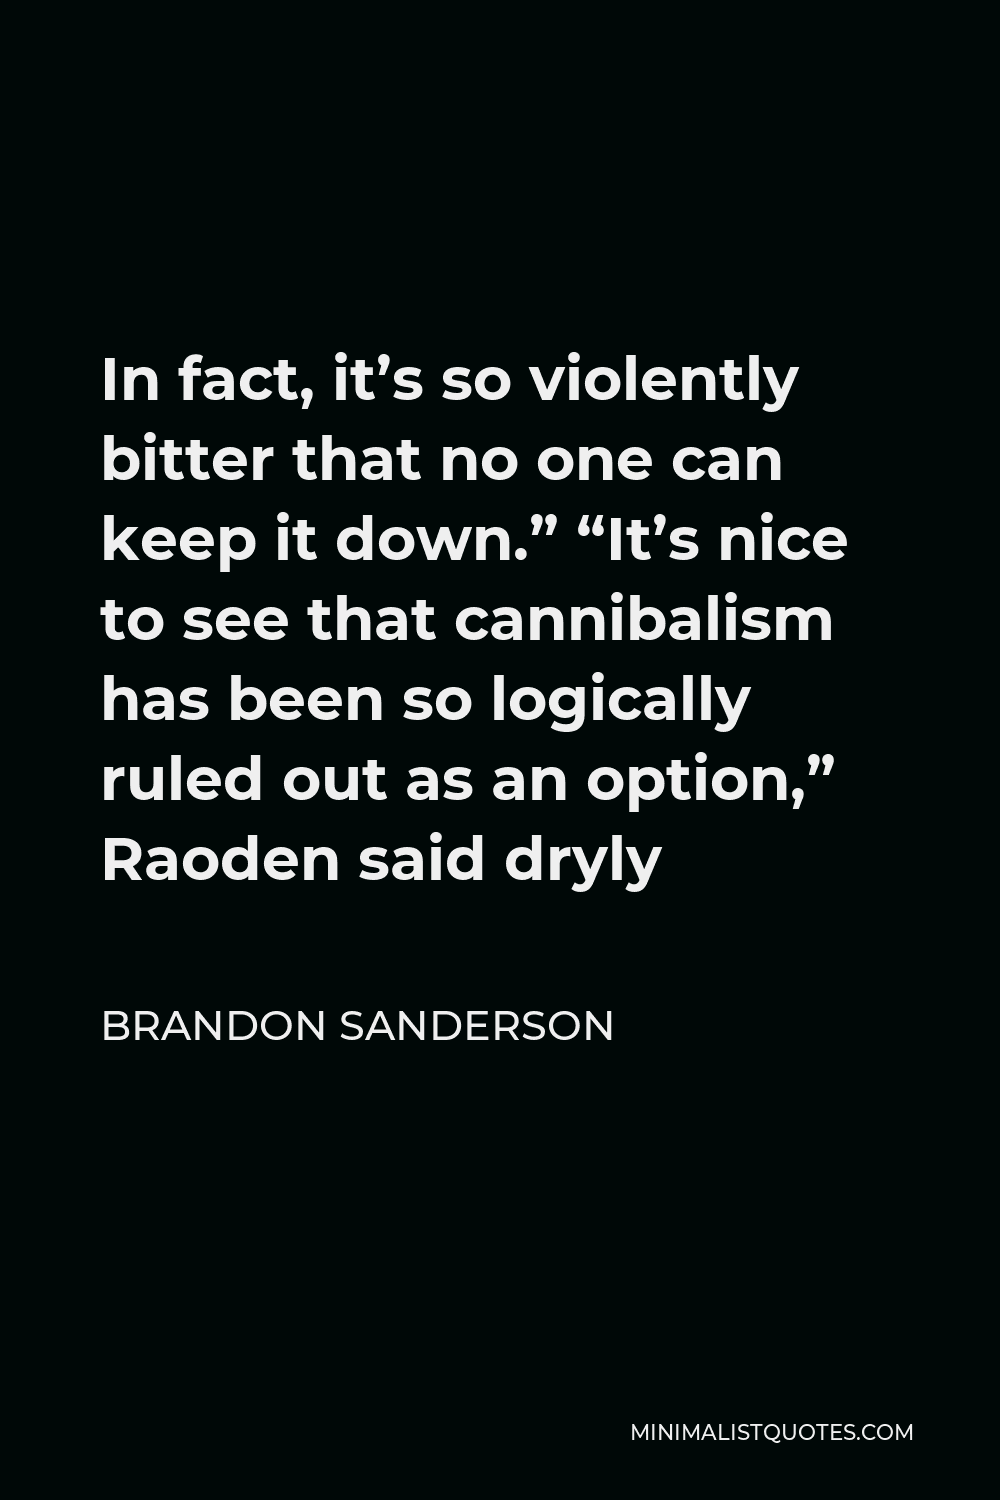 Brandon Sanderson Quote - In fact, it’s so violently bitter that no one can keep it down.” “It’s nice to see that cannibalism has been so logically ruled out as an option,” Raoden said dryly